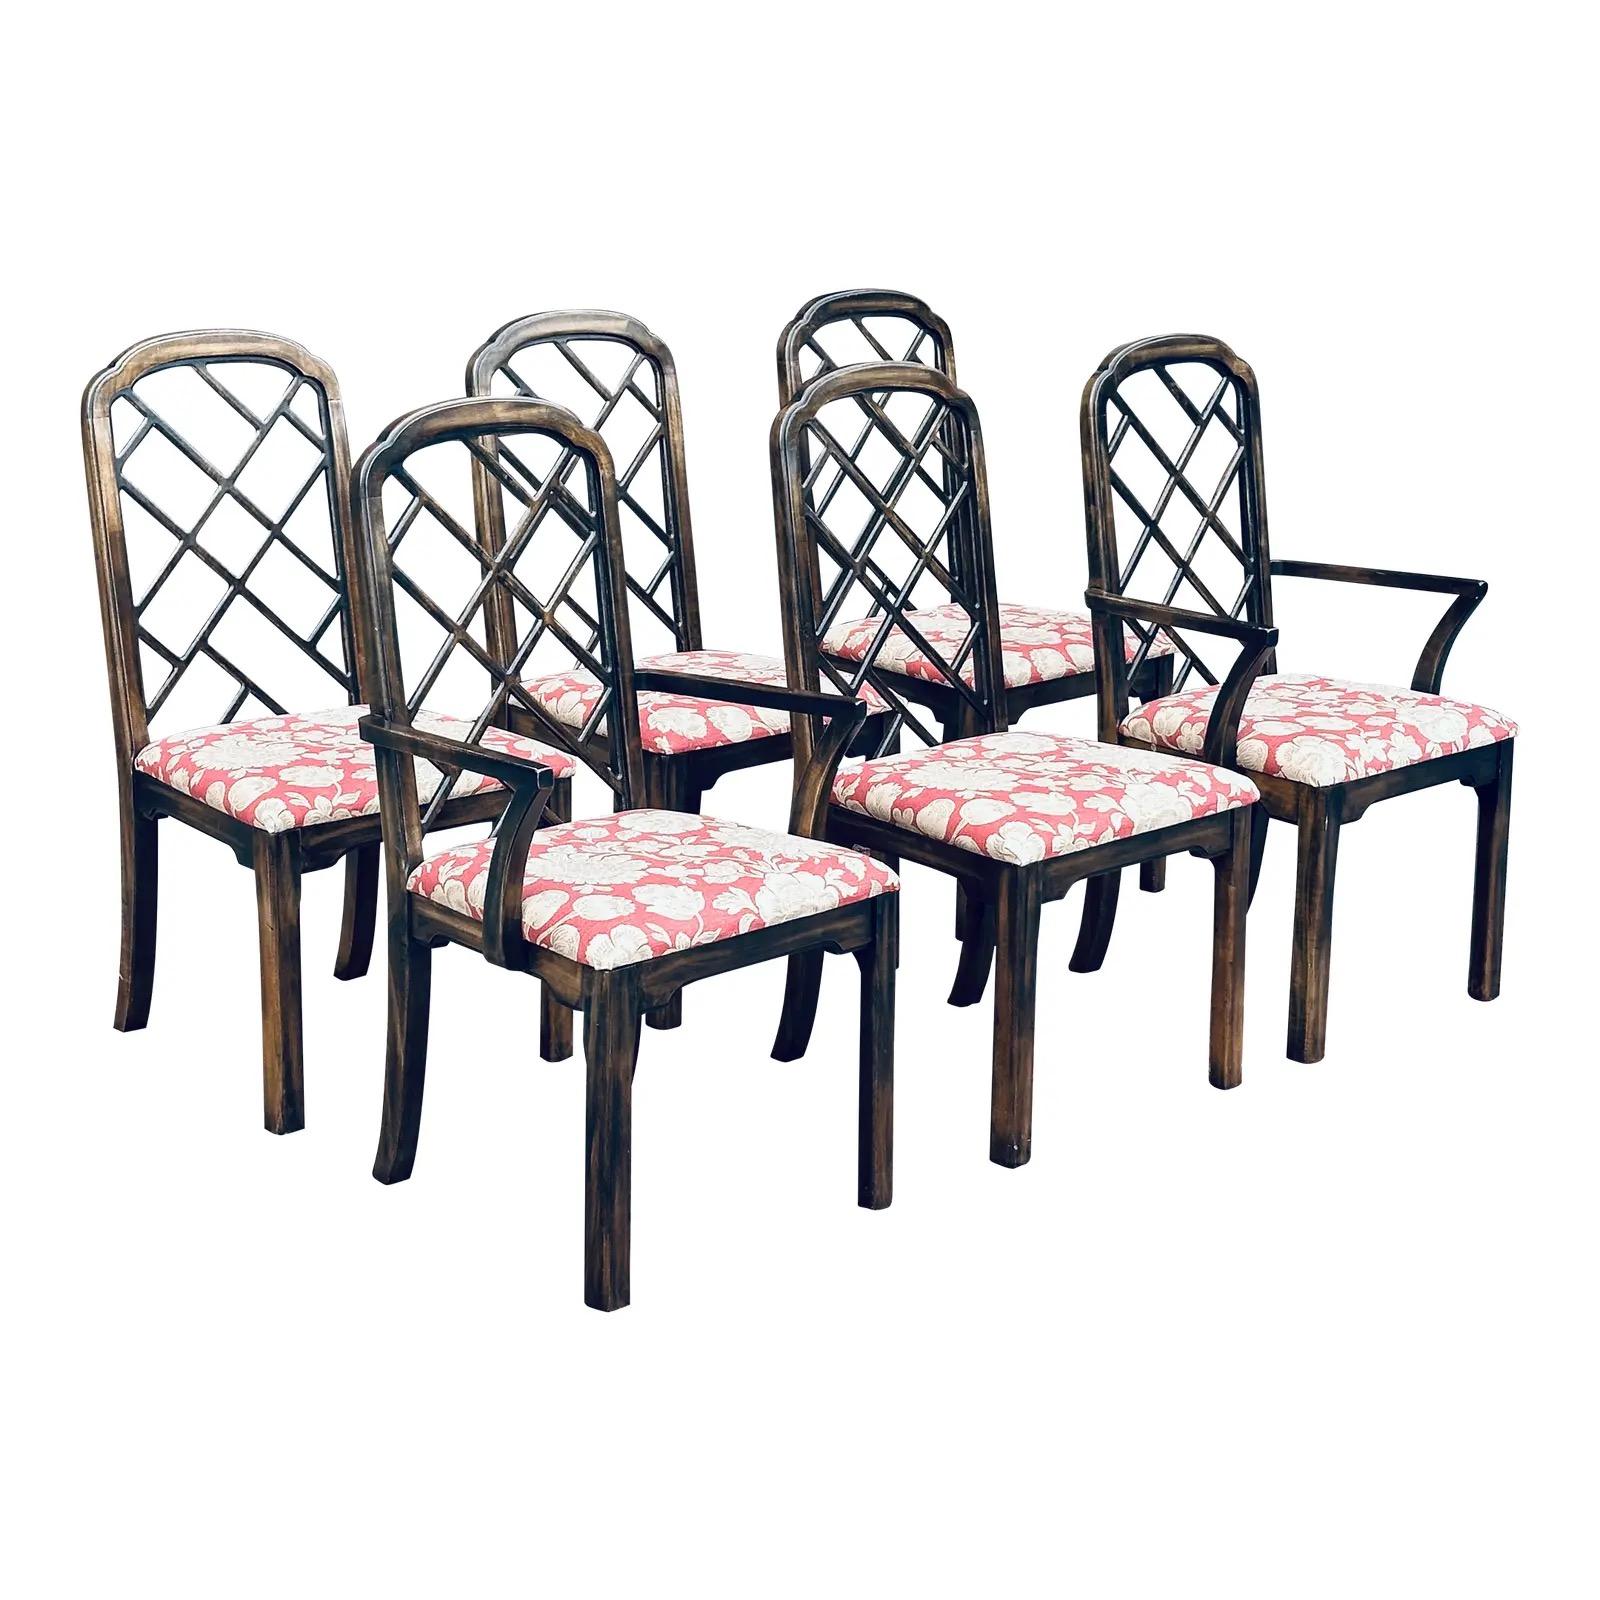 Vintage Thomasville Chinese Chippendale Fretwork Hollywood Regency Dining Chairs For Sale